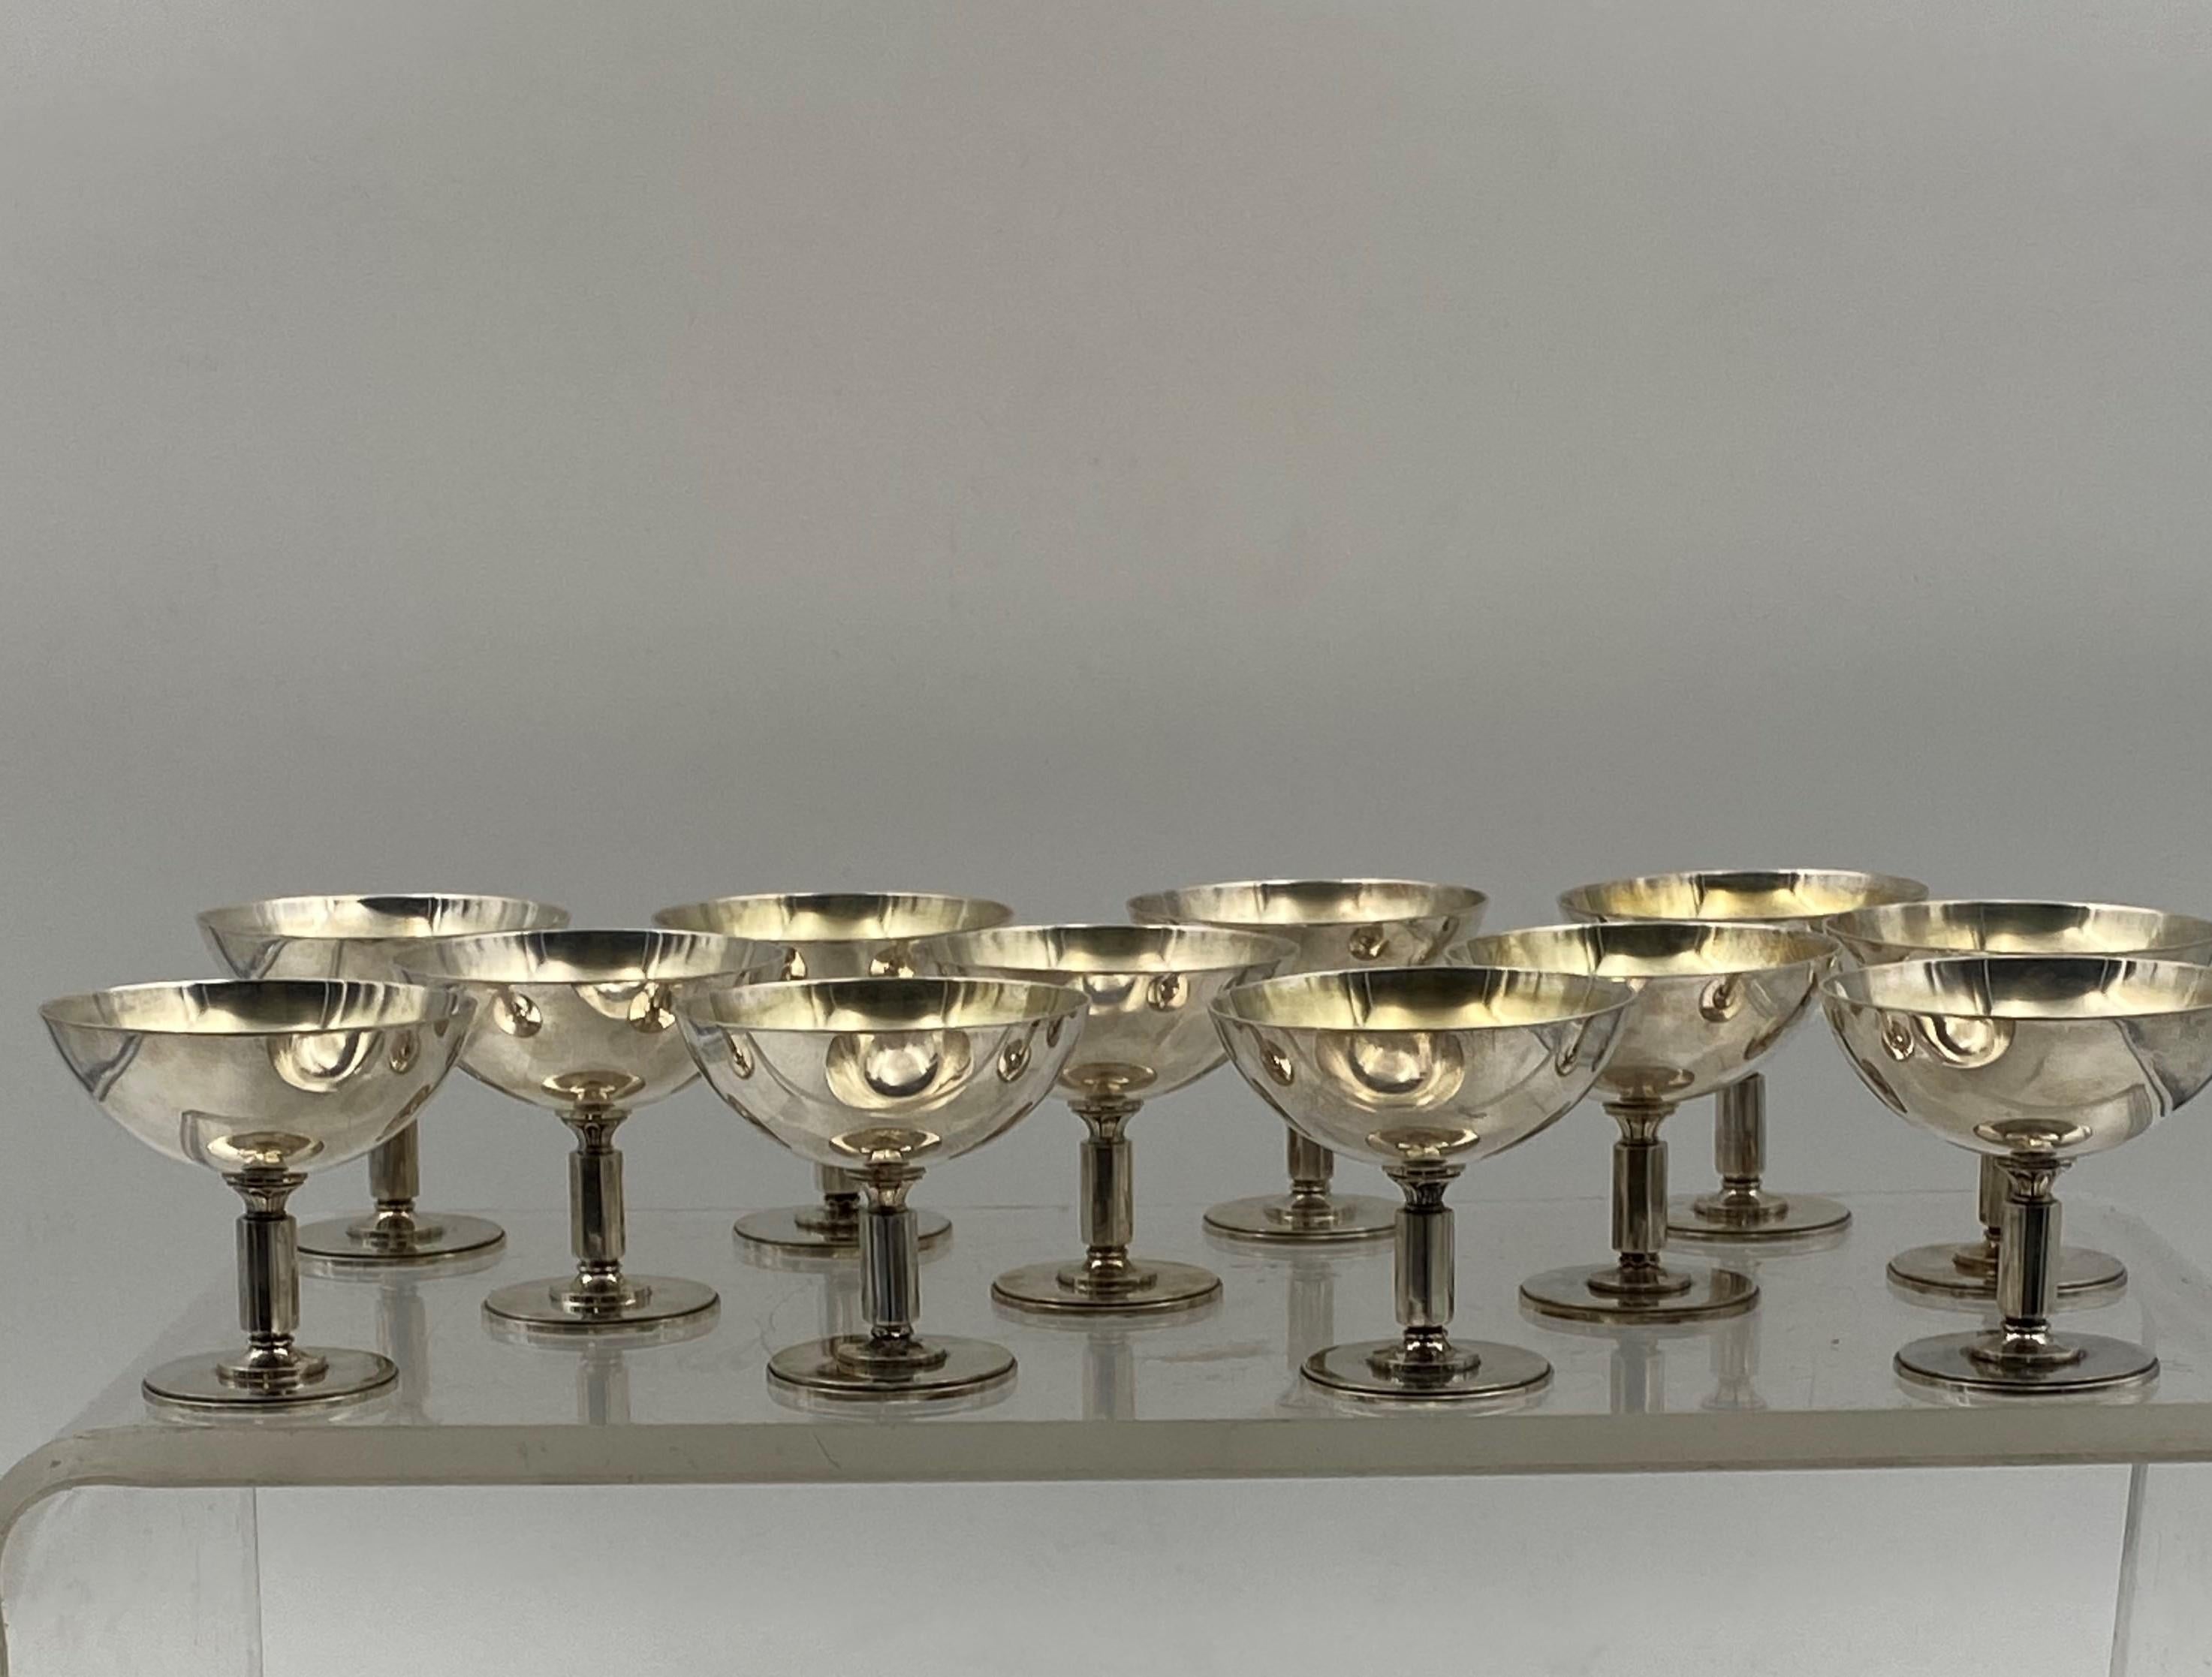 Set of 12 gilt wash bowls/Kiddush cups/champagnes/desserts by Swedish maker Borgila from the mid-20th century in Art Deco style with a palmette motif. They are reminiscent of the Pyramid style by famed maker Georg Jensen. They measure 2 7/8'' in